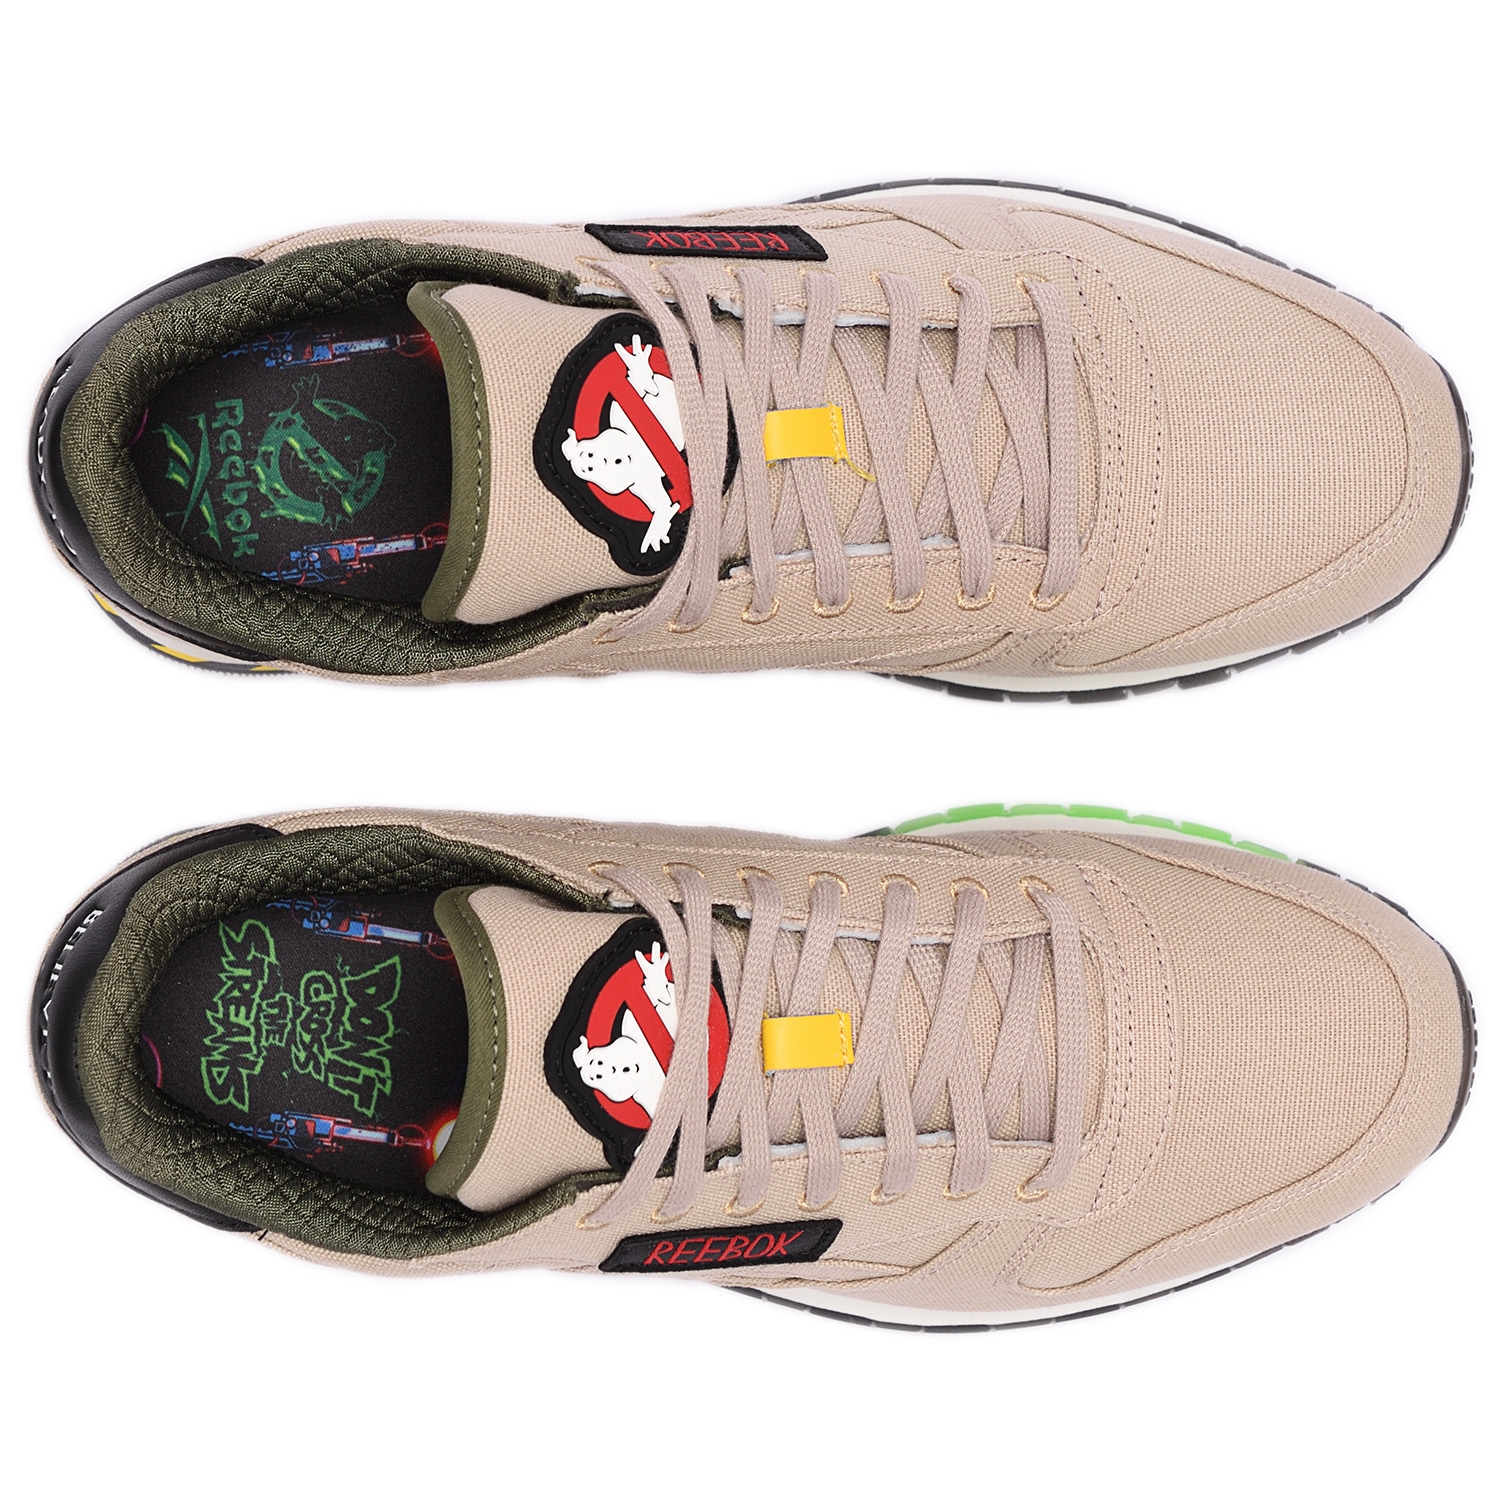 Reebok x Ghostbusters CLASSIC LEATHER